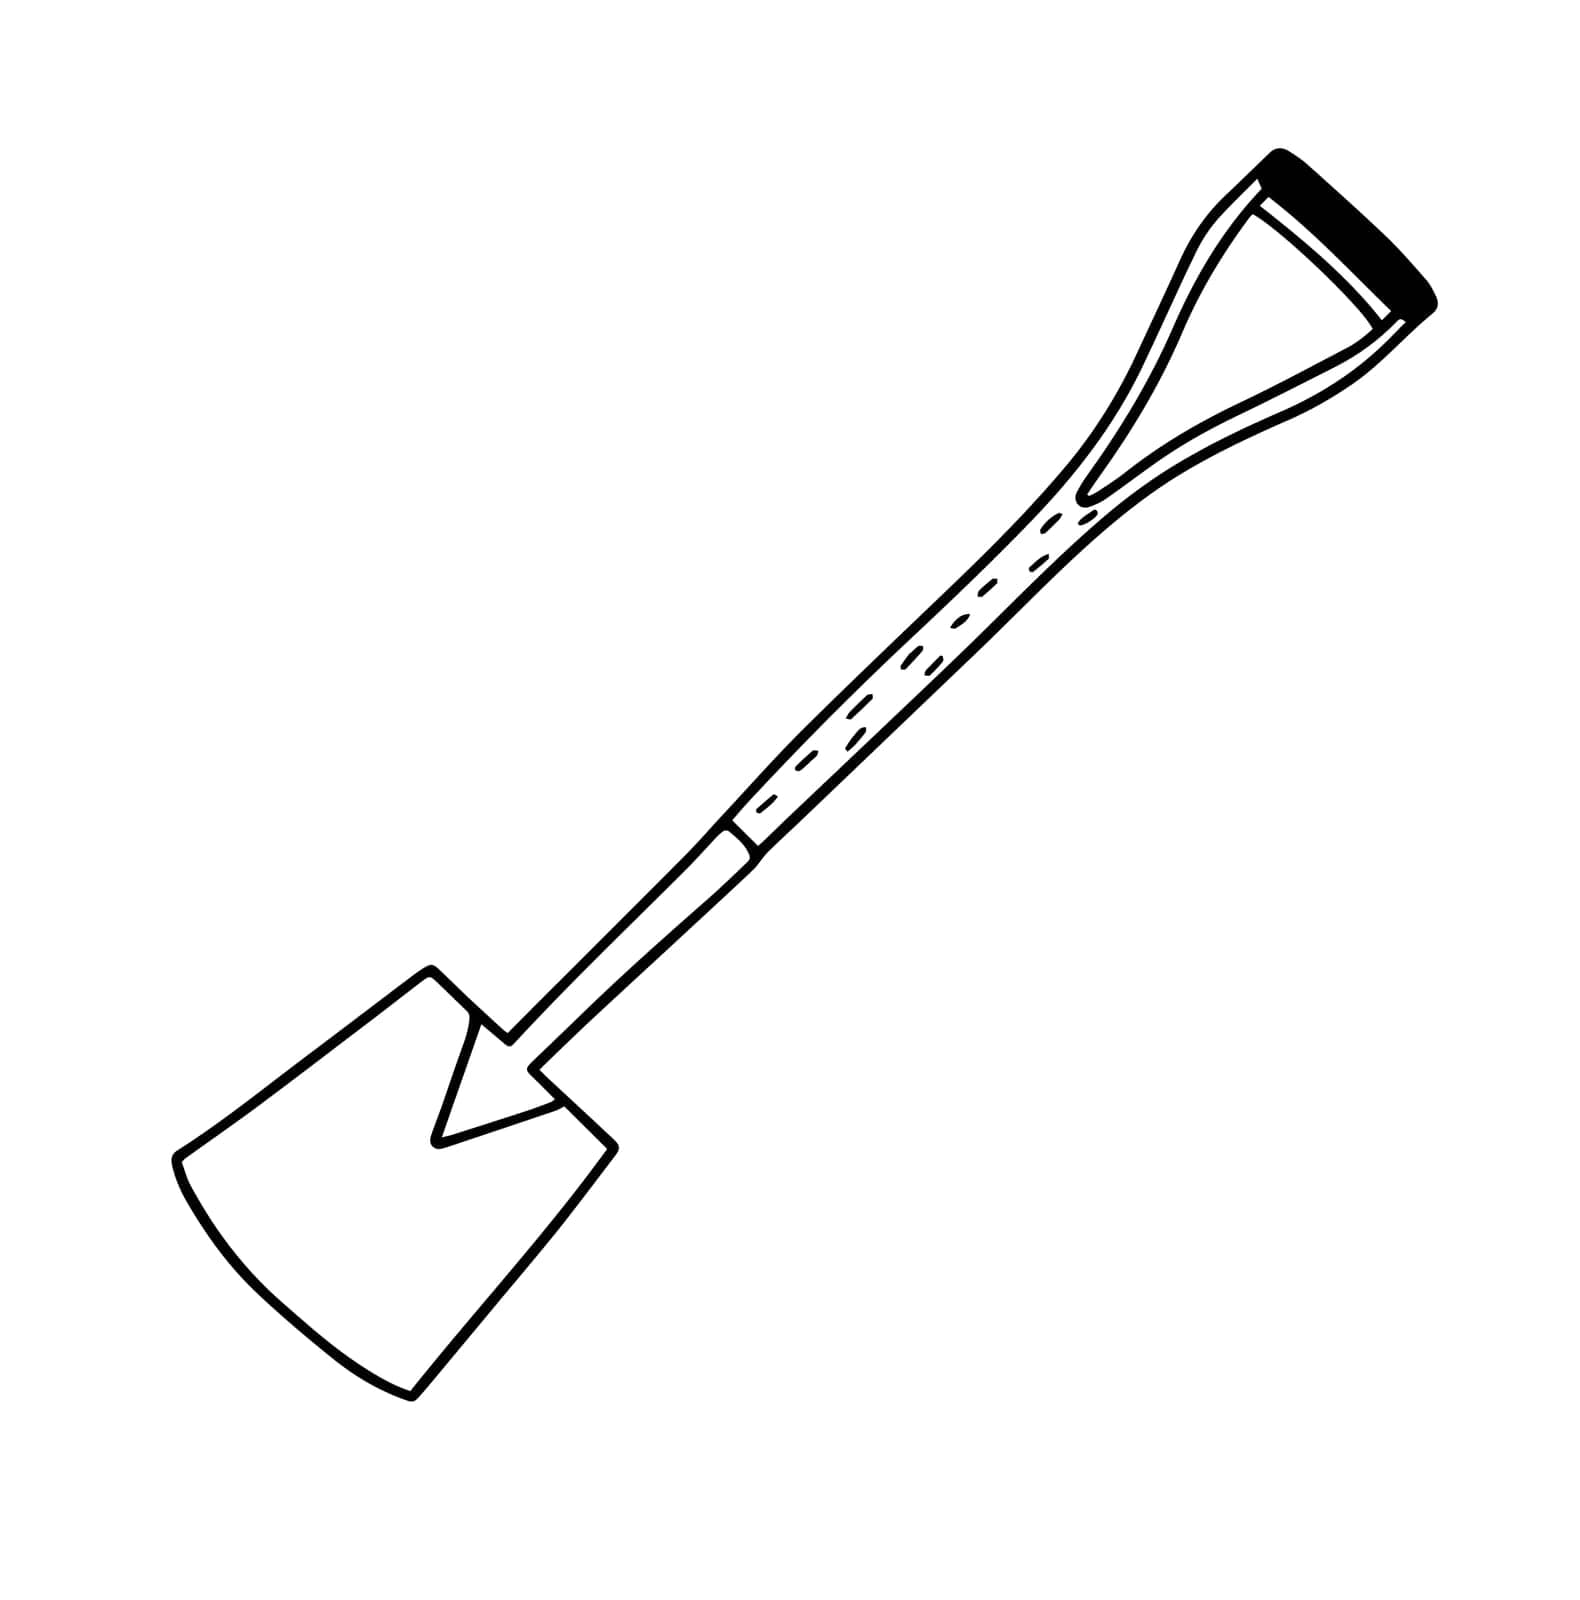 Garden shovel isolated on a white background. Garden scoop. Shovel for earthworks.a tool for digging and transplanting plants. Vector illustration in the Doodle style